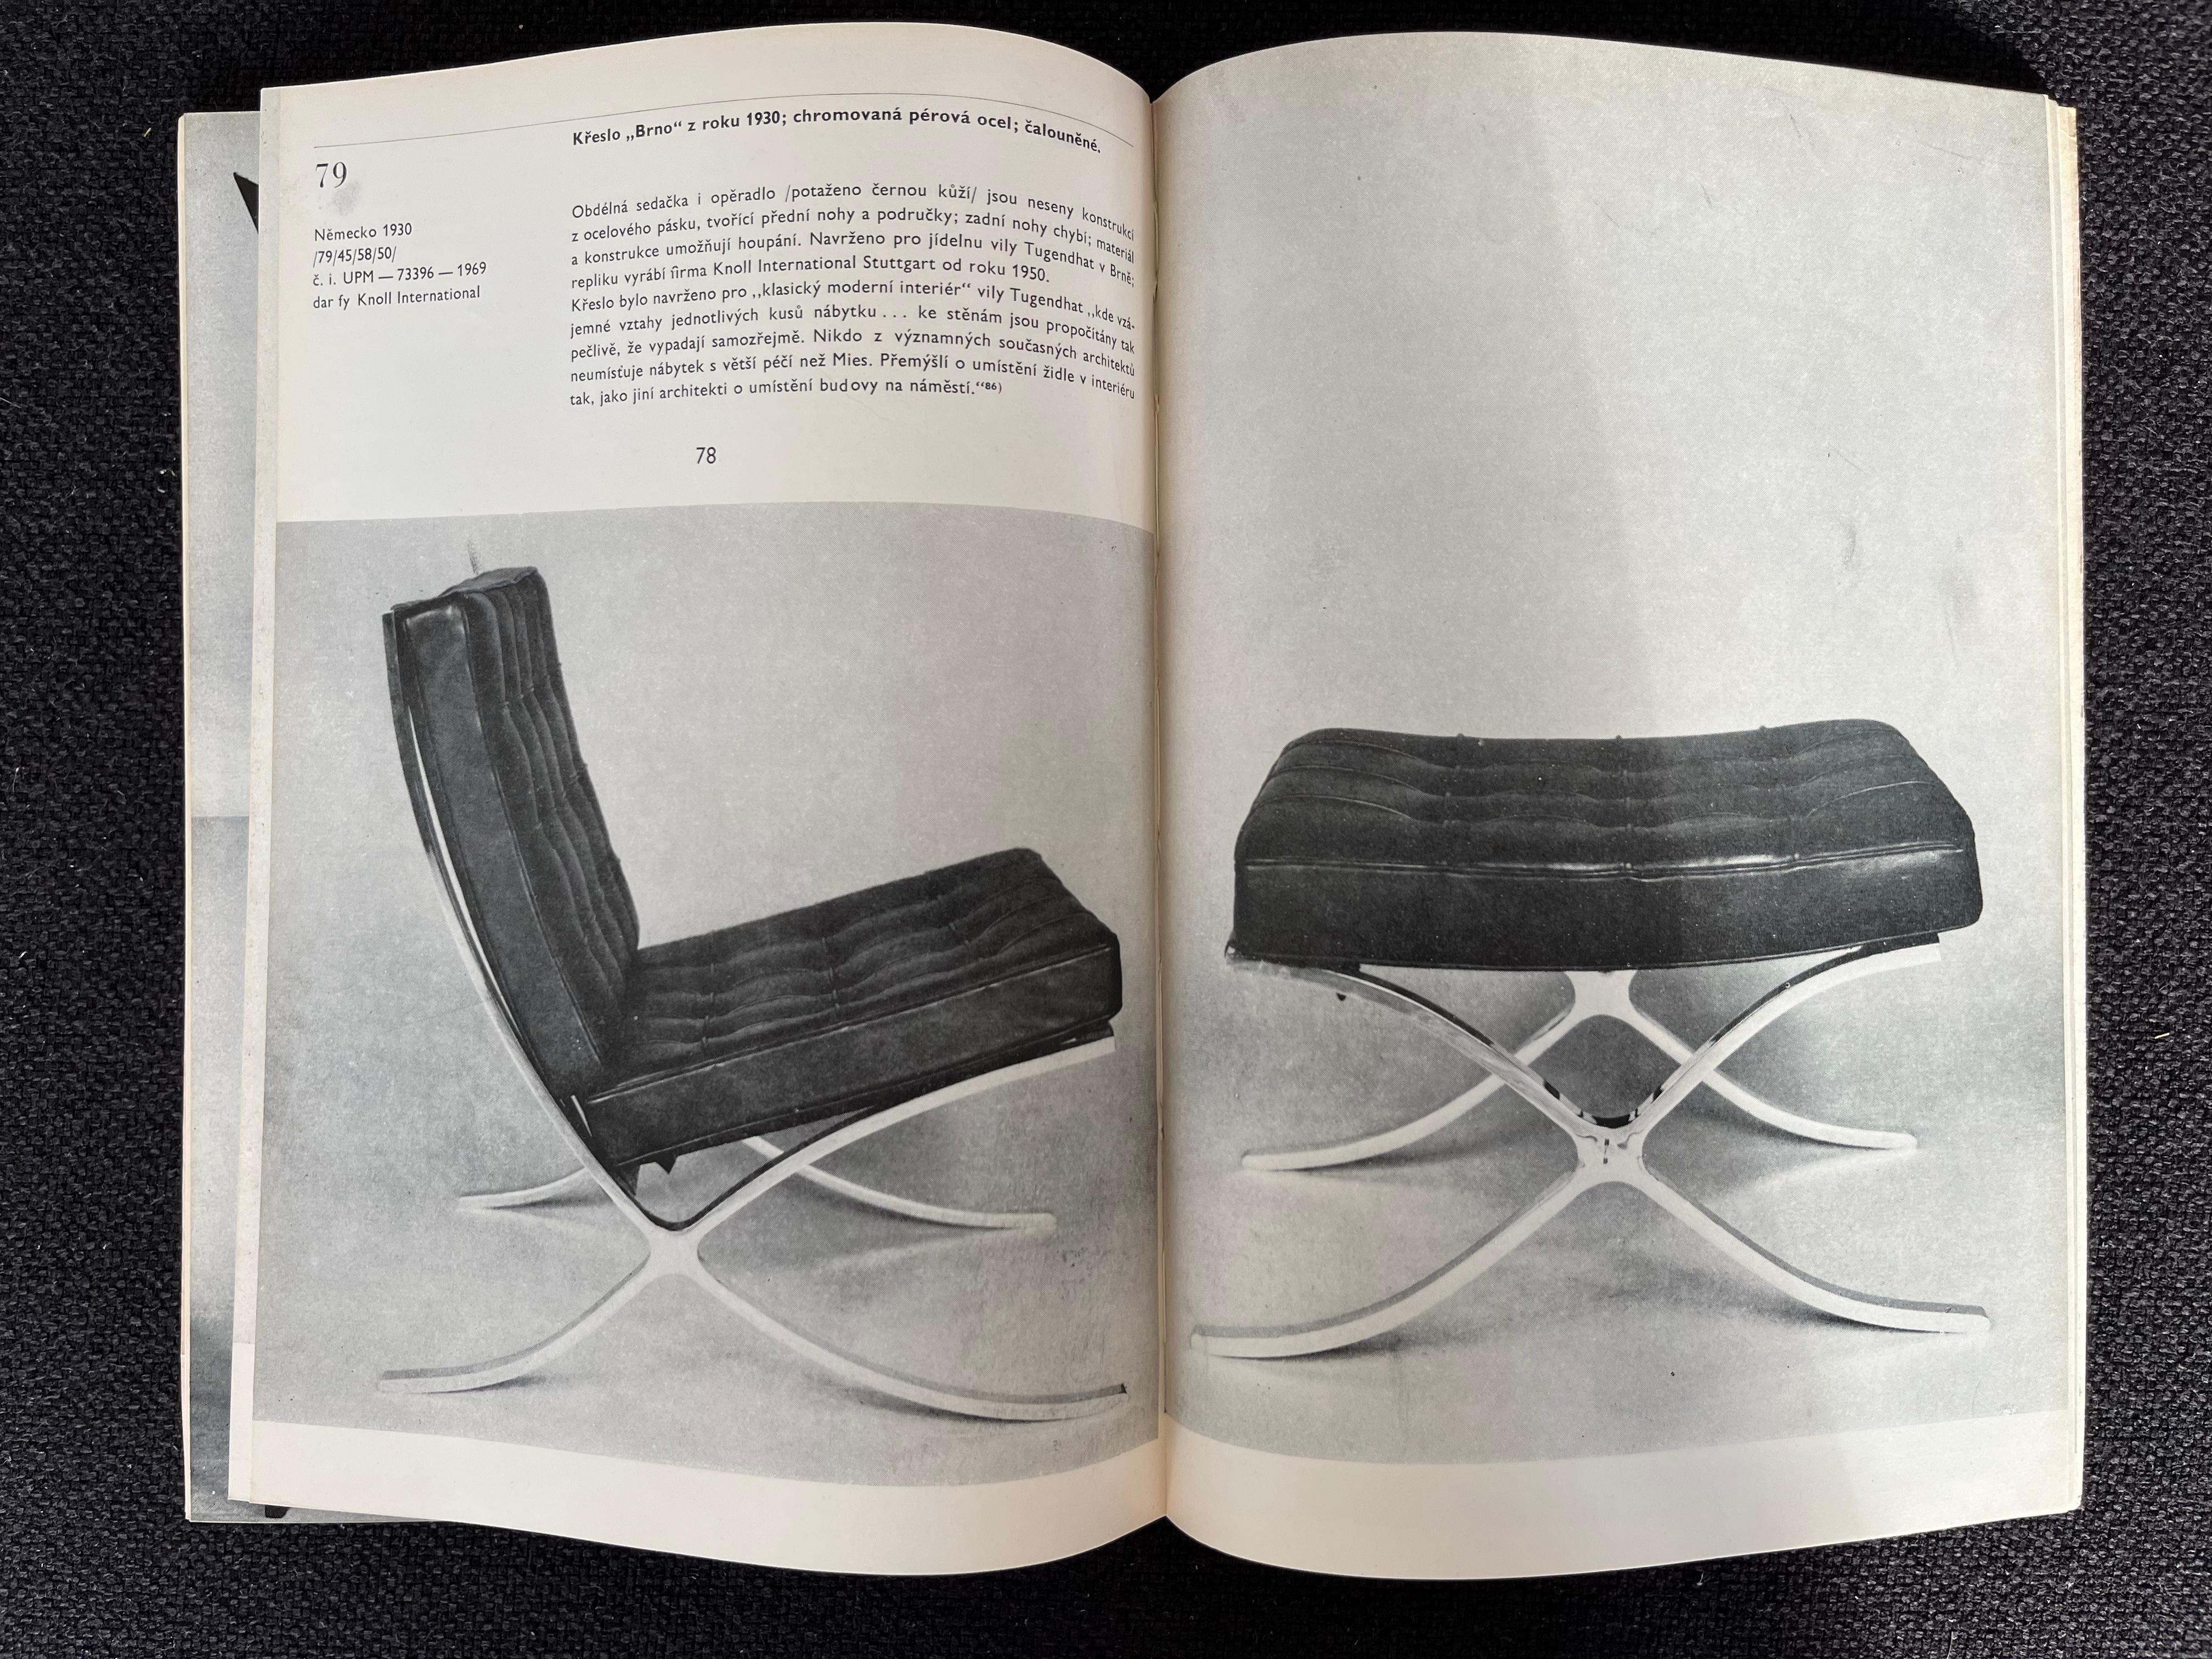 - 1972, Museum of decorative arts in Prague.
- 2000 copies
- czech language
- original condition, see the photos
- pages not numered
- many pictures of chairs by Mies van der Rohe, Eoro Saarinen,
 Adolf Loos, Arne Jacobsen..
- jr.